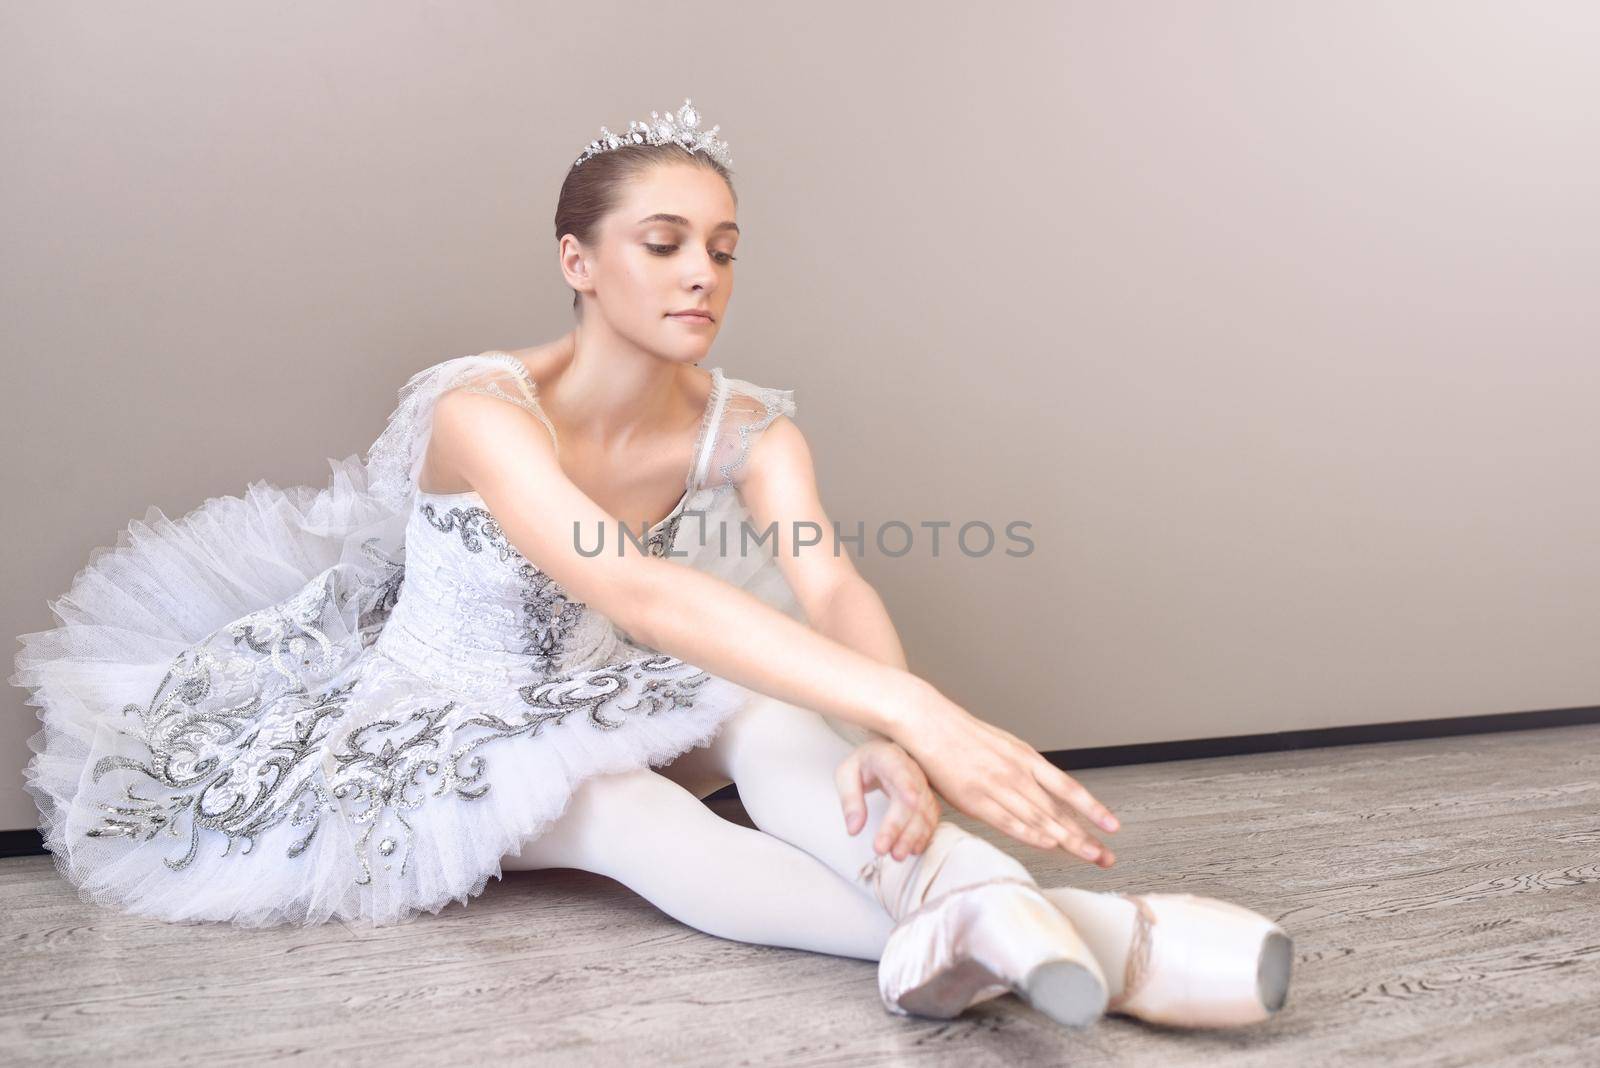 a cute ballerina sitting on the floor with her arms outstretched forward, practicing ballet poses in the studio by Nickstock